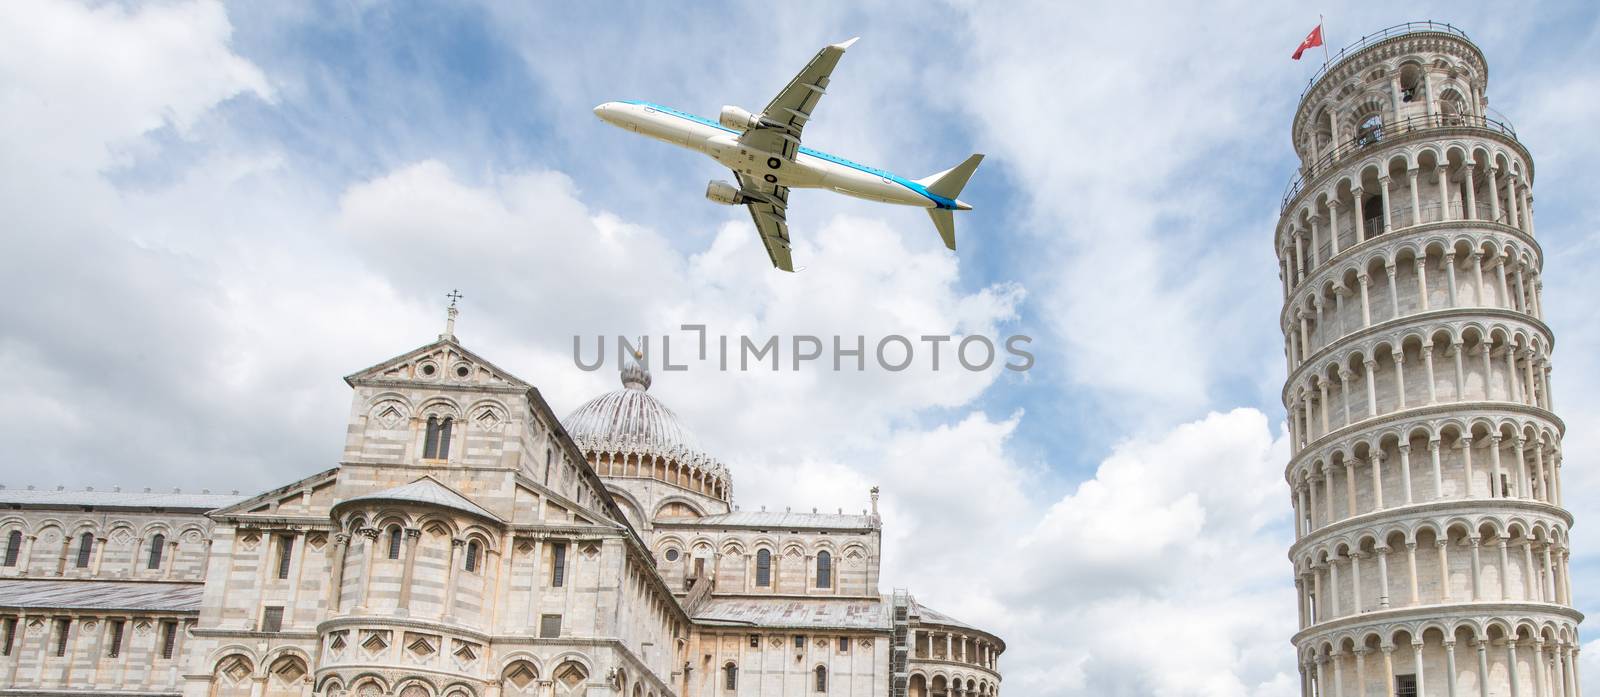 Airplane over Square of Miracles in Pisa - Italy.